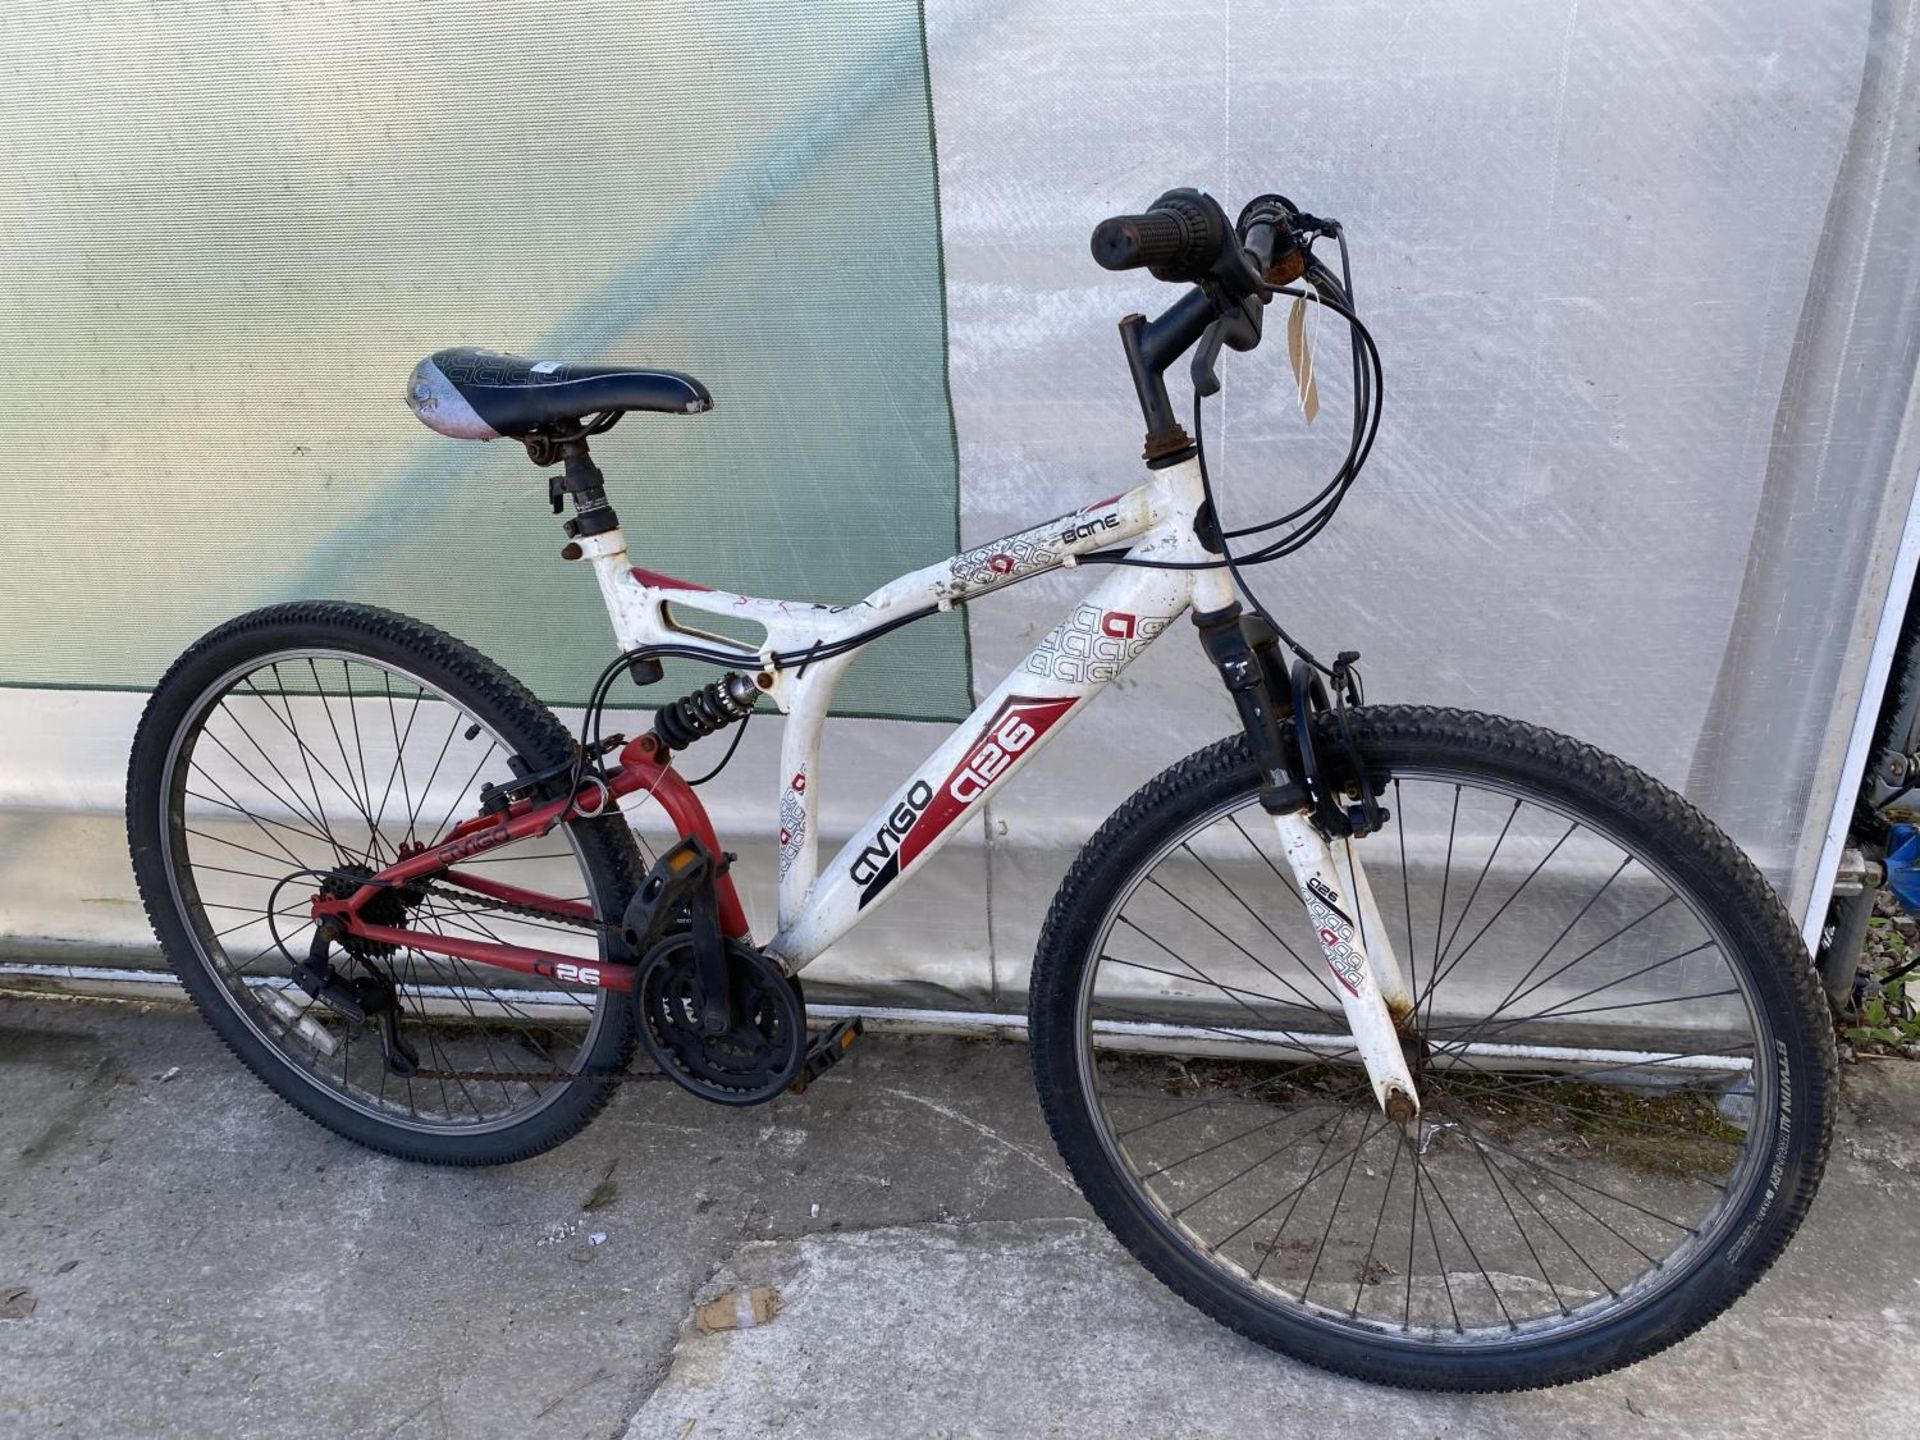 A GENTS AMIGO MOUNTAIN BIKE WITH FRONT AND REAR SUSPENSION AND AN 18 SPEED GEAR SYSTEM